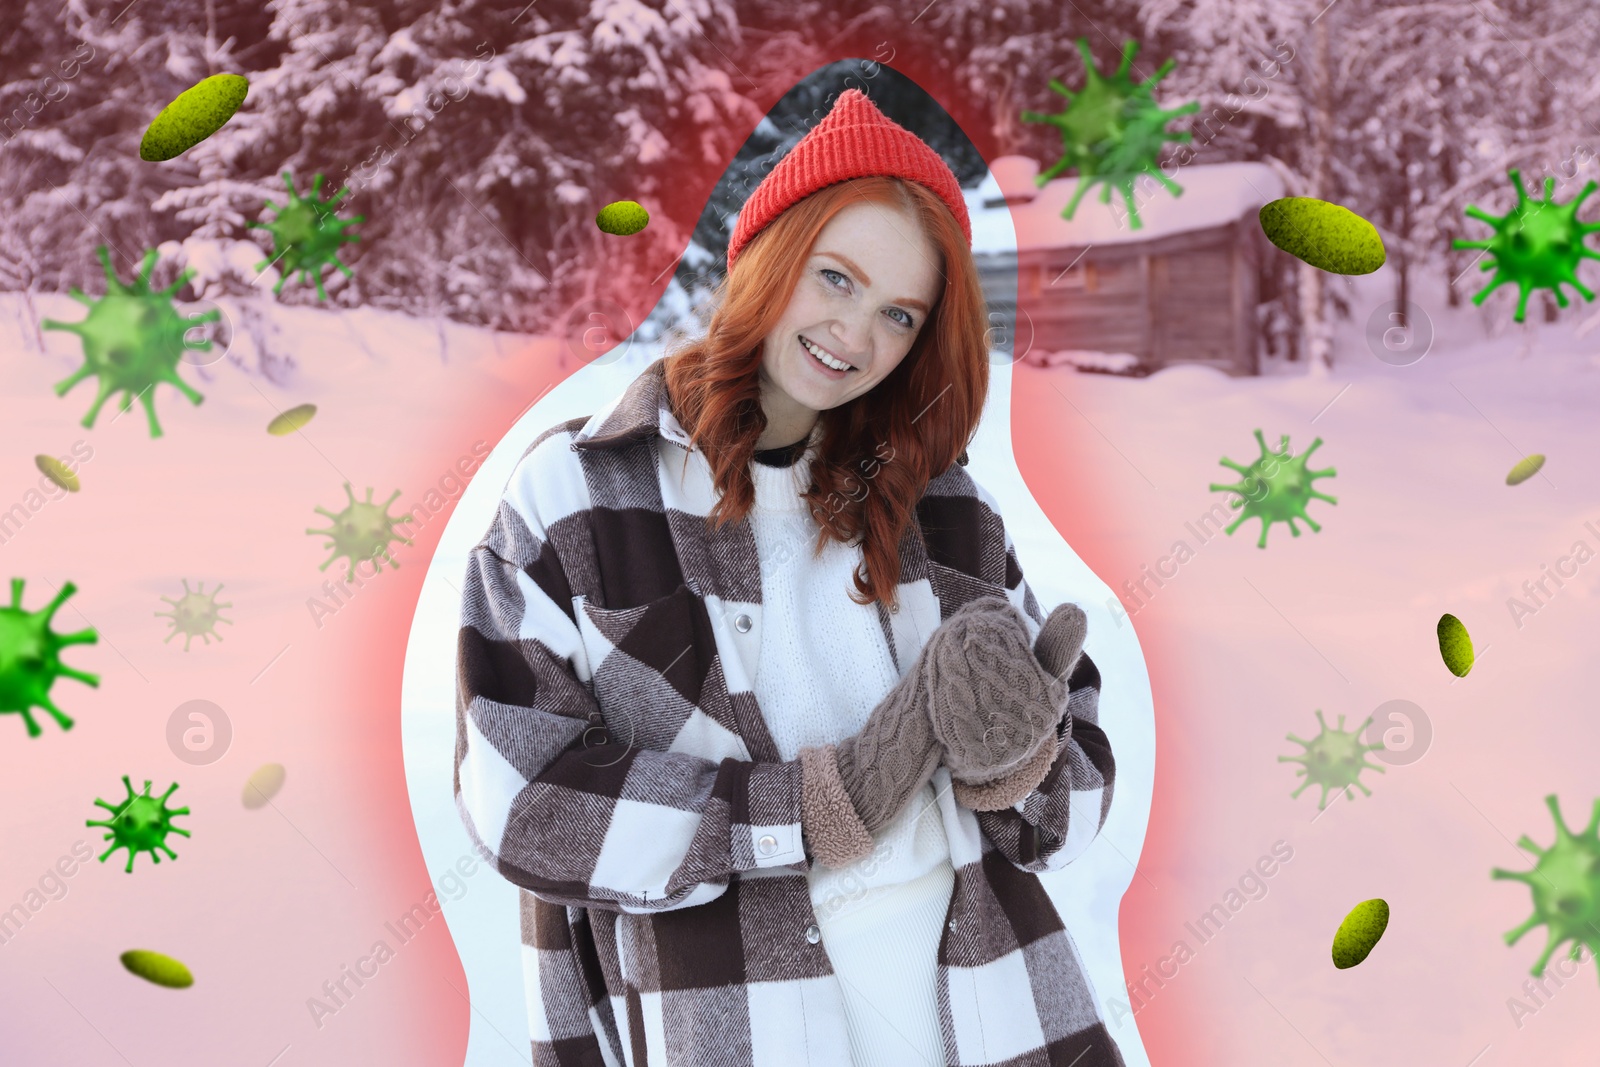 Image of Woman with strong immunity surrounded by viruses outdoors